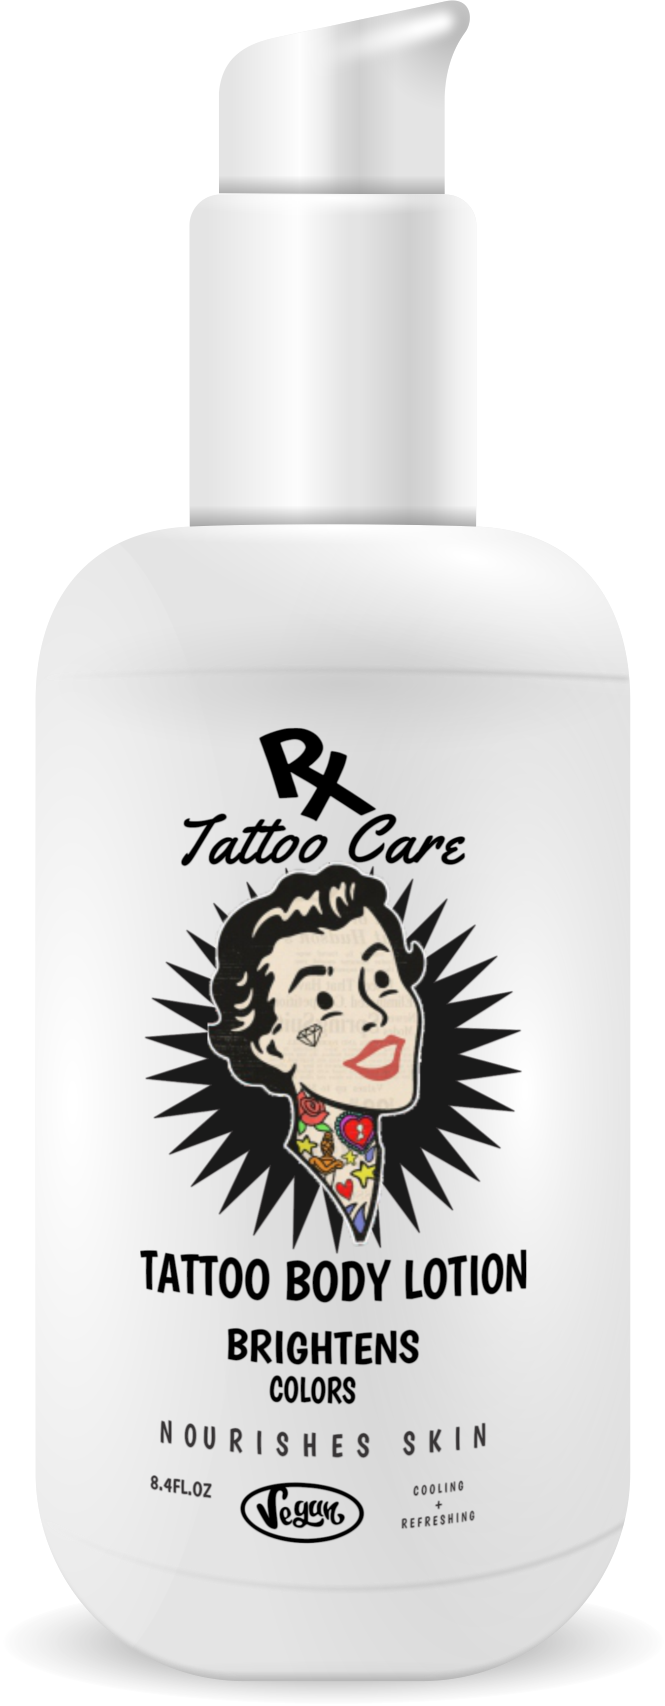 Rx Tattoo Care - Best Tattoo Aftercare